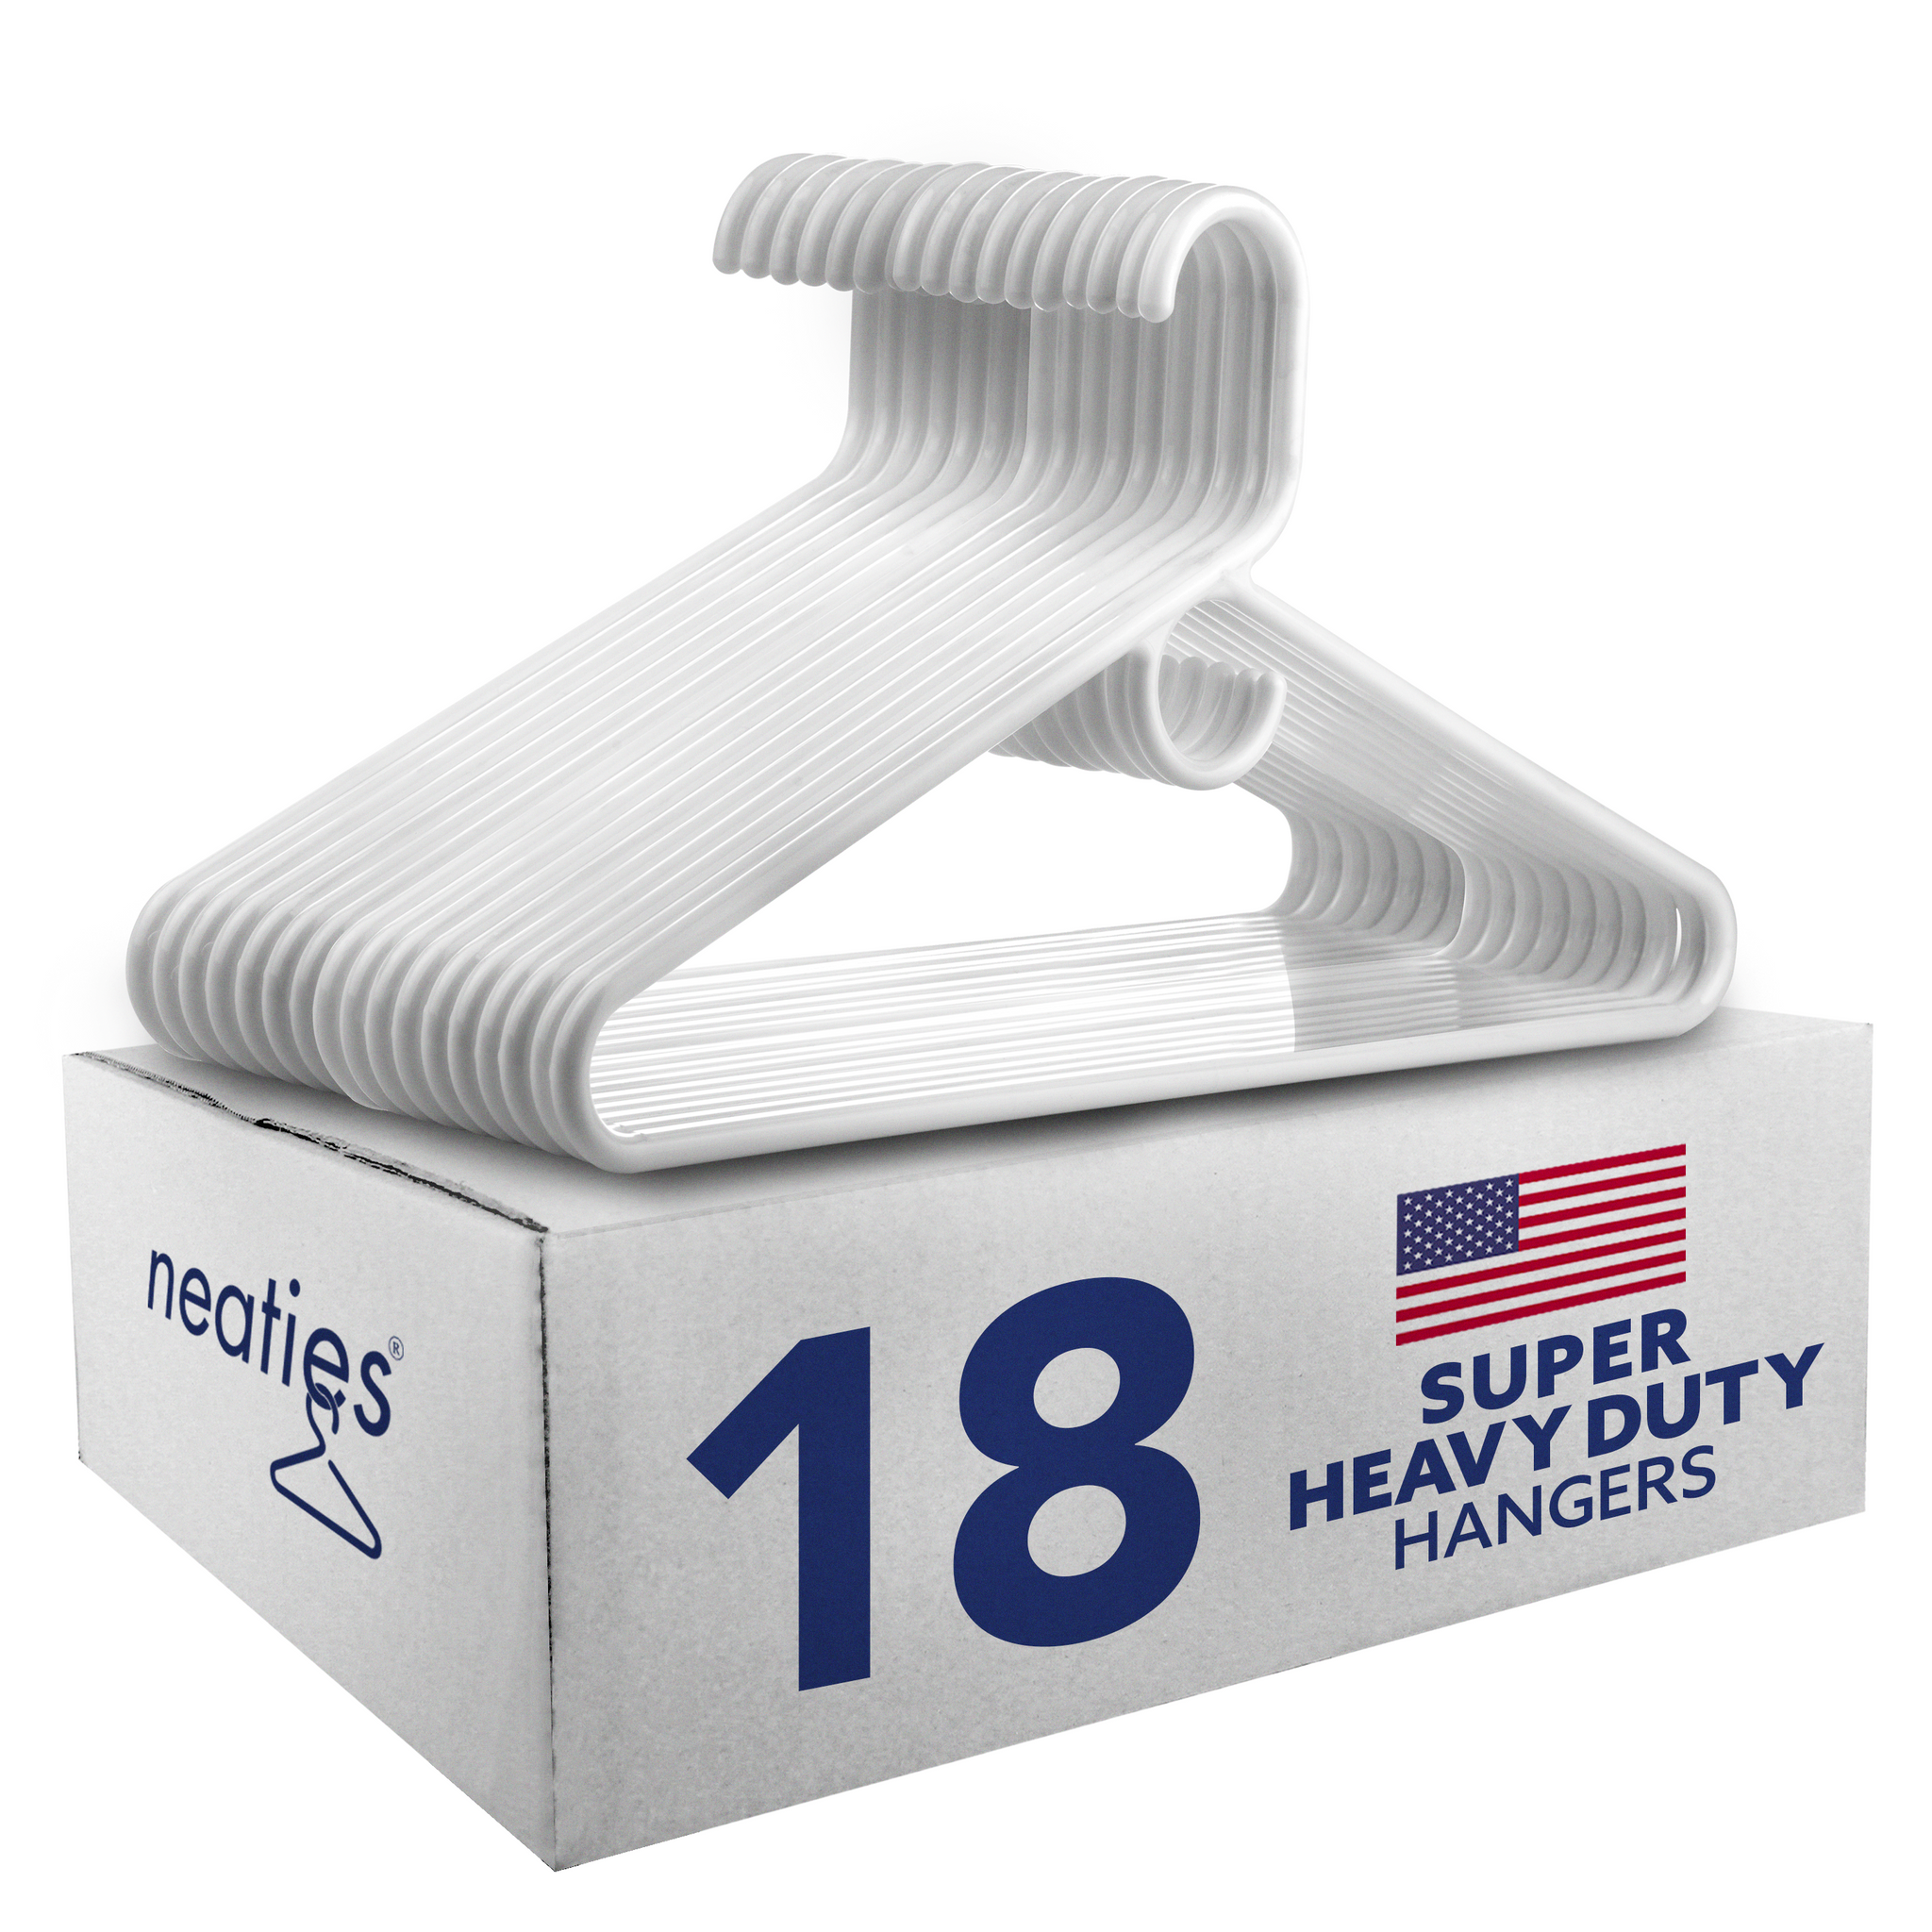 Mainstay Strong Extra Heavy Adult Plastic Tube Hangers - White - 9 ct